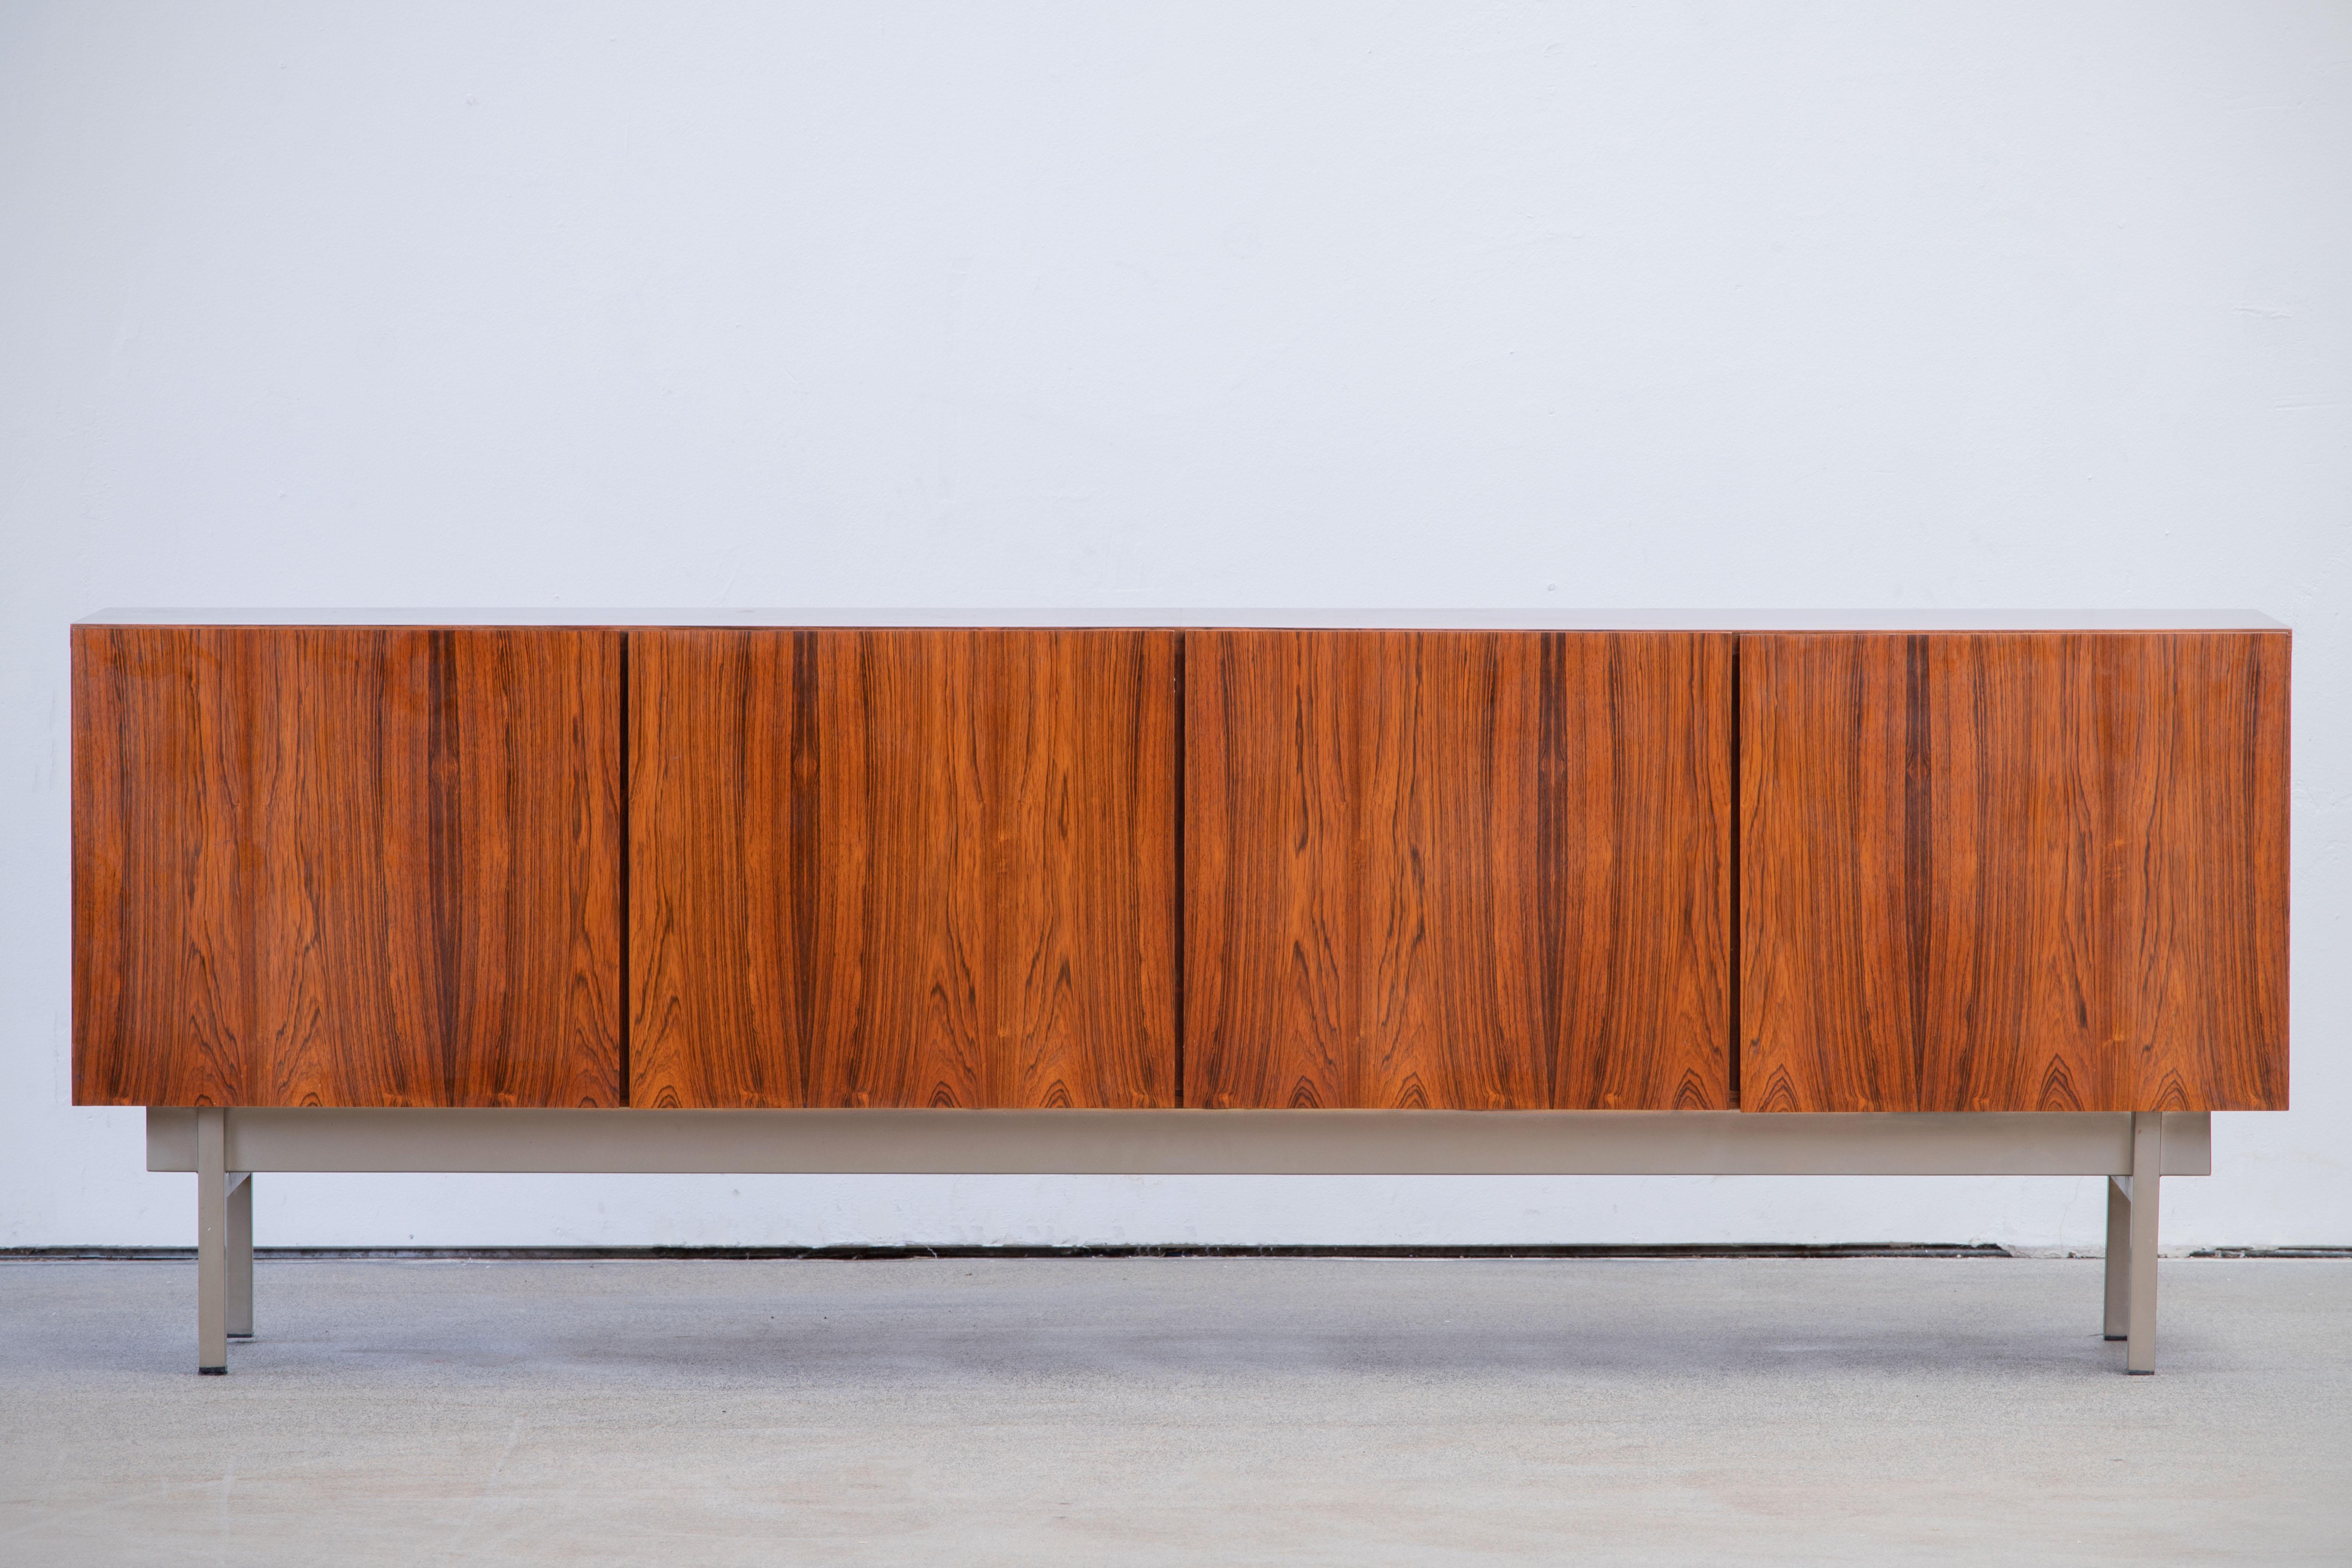 Stunning midcentury Cocobolo sideboard, 1960s, beautiful grain.
The row consists of three storage compartments with shelves and a drawers column. The sycamore interior brings an elegant contrast to the sideboard.
An elegant piece.
Good condition